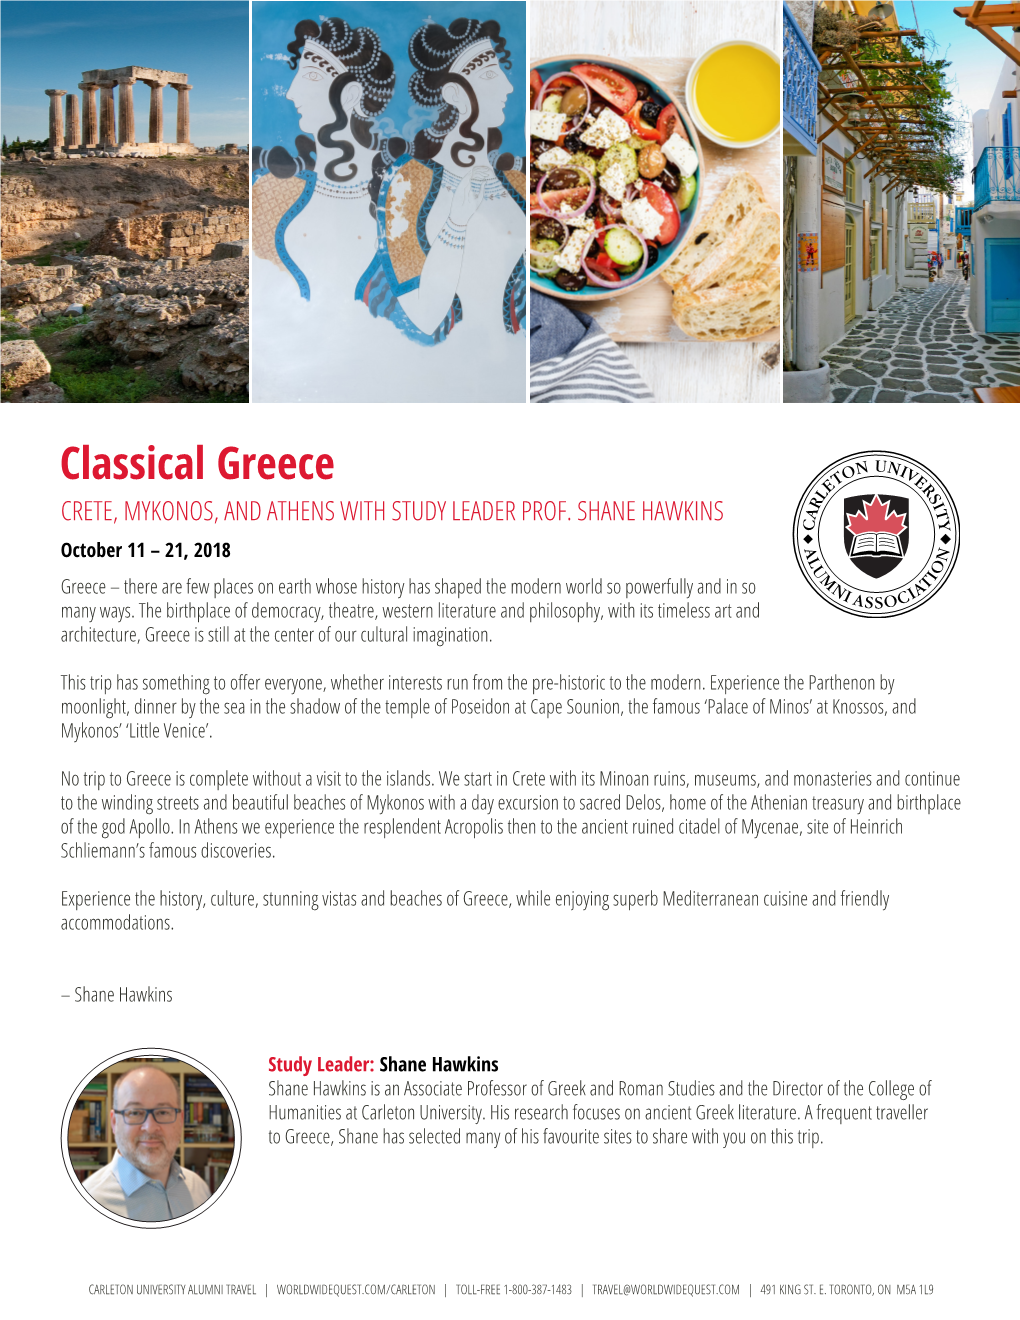 Classical Greece CRETE, MYKONOS, and ATHENS with STUDY LEADER PROF